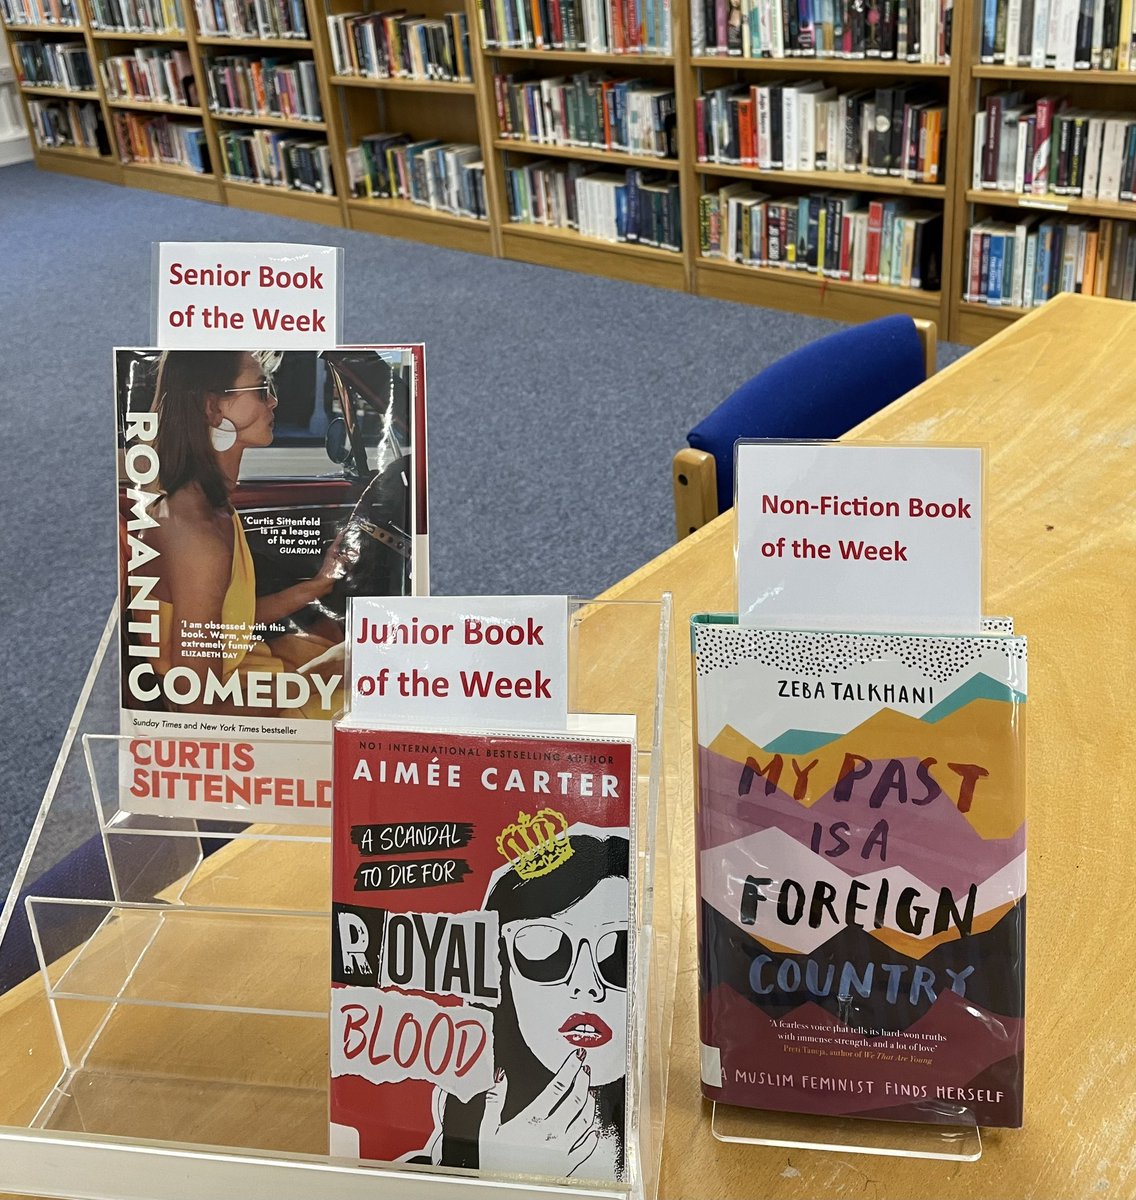 Bright and early on a Monday morning, here are our new Books of the Week! Royal Blood by @aimee_carter, Romantic Comedy by @csittenfeld and My Past is a Foreign Country by @ZebaTalk 📚🌟📖❤️#ReadingForPleasure @GandLSchool @Usborne @DoubledayUK @SceptreBooks